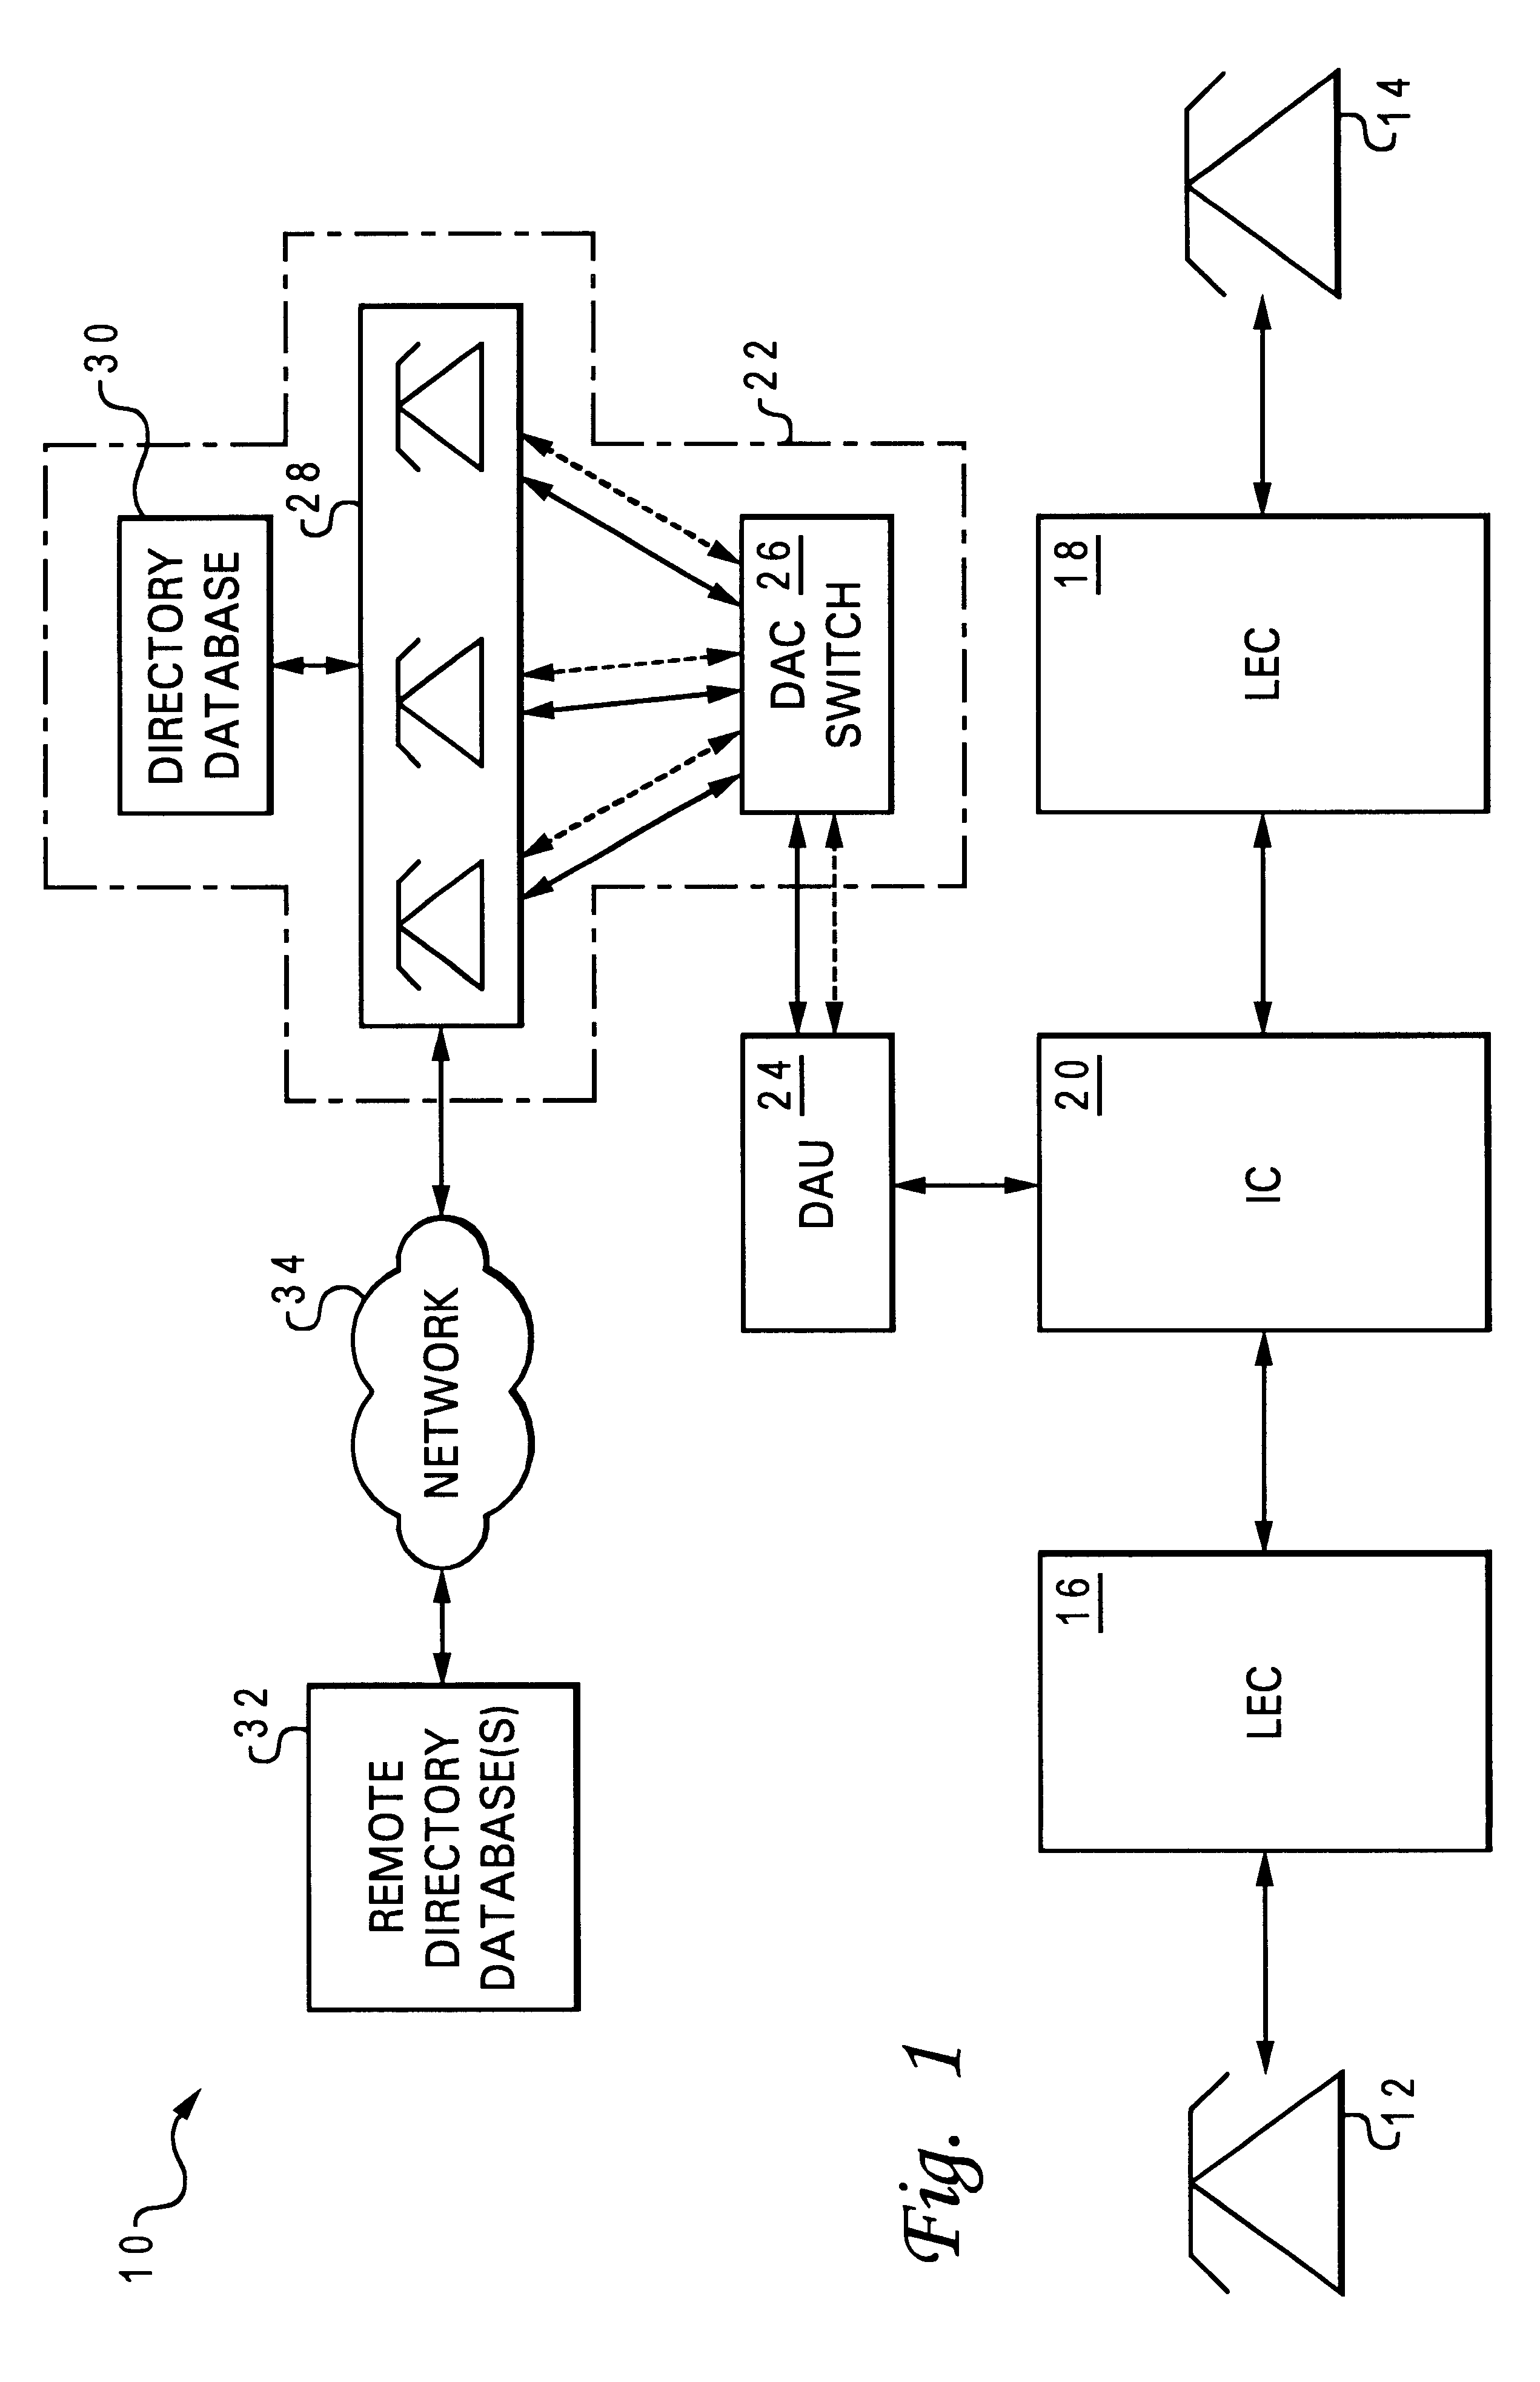 Method and system for automatically providing a customer billing identifier for a directory assistance extension call to a switch in a public telephone network